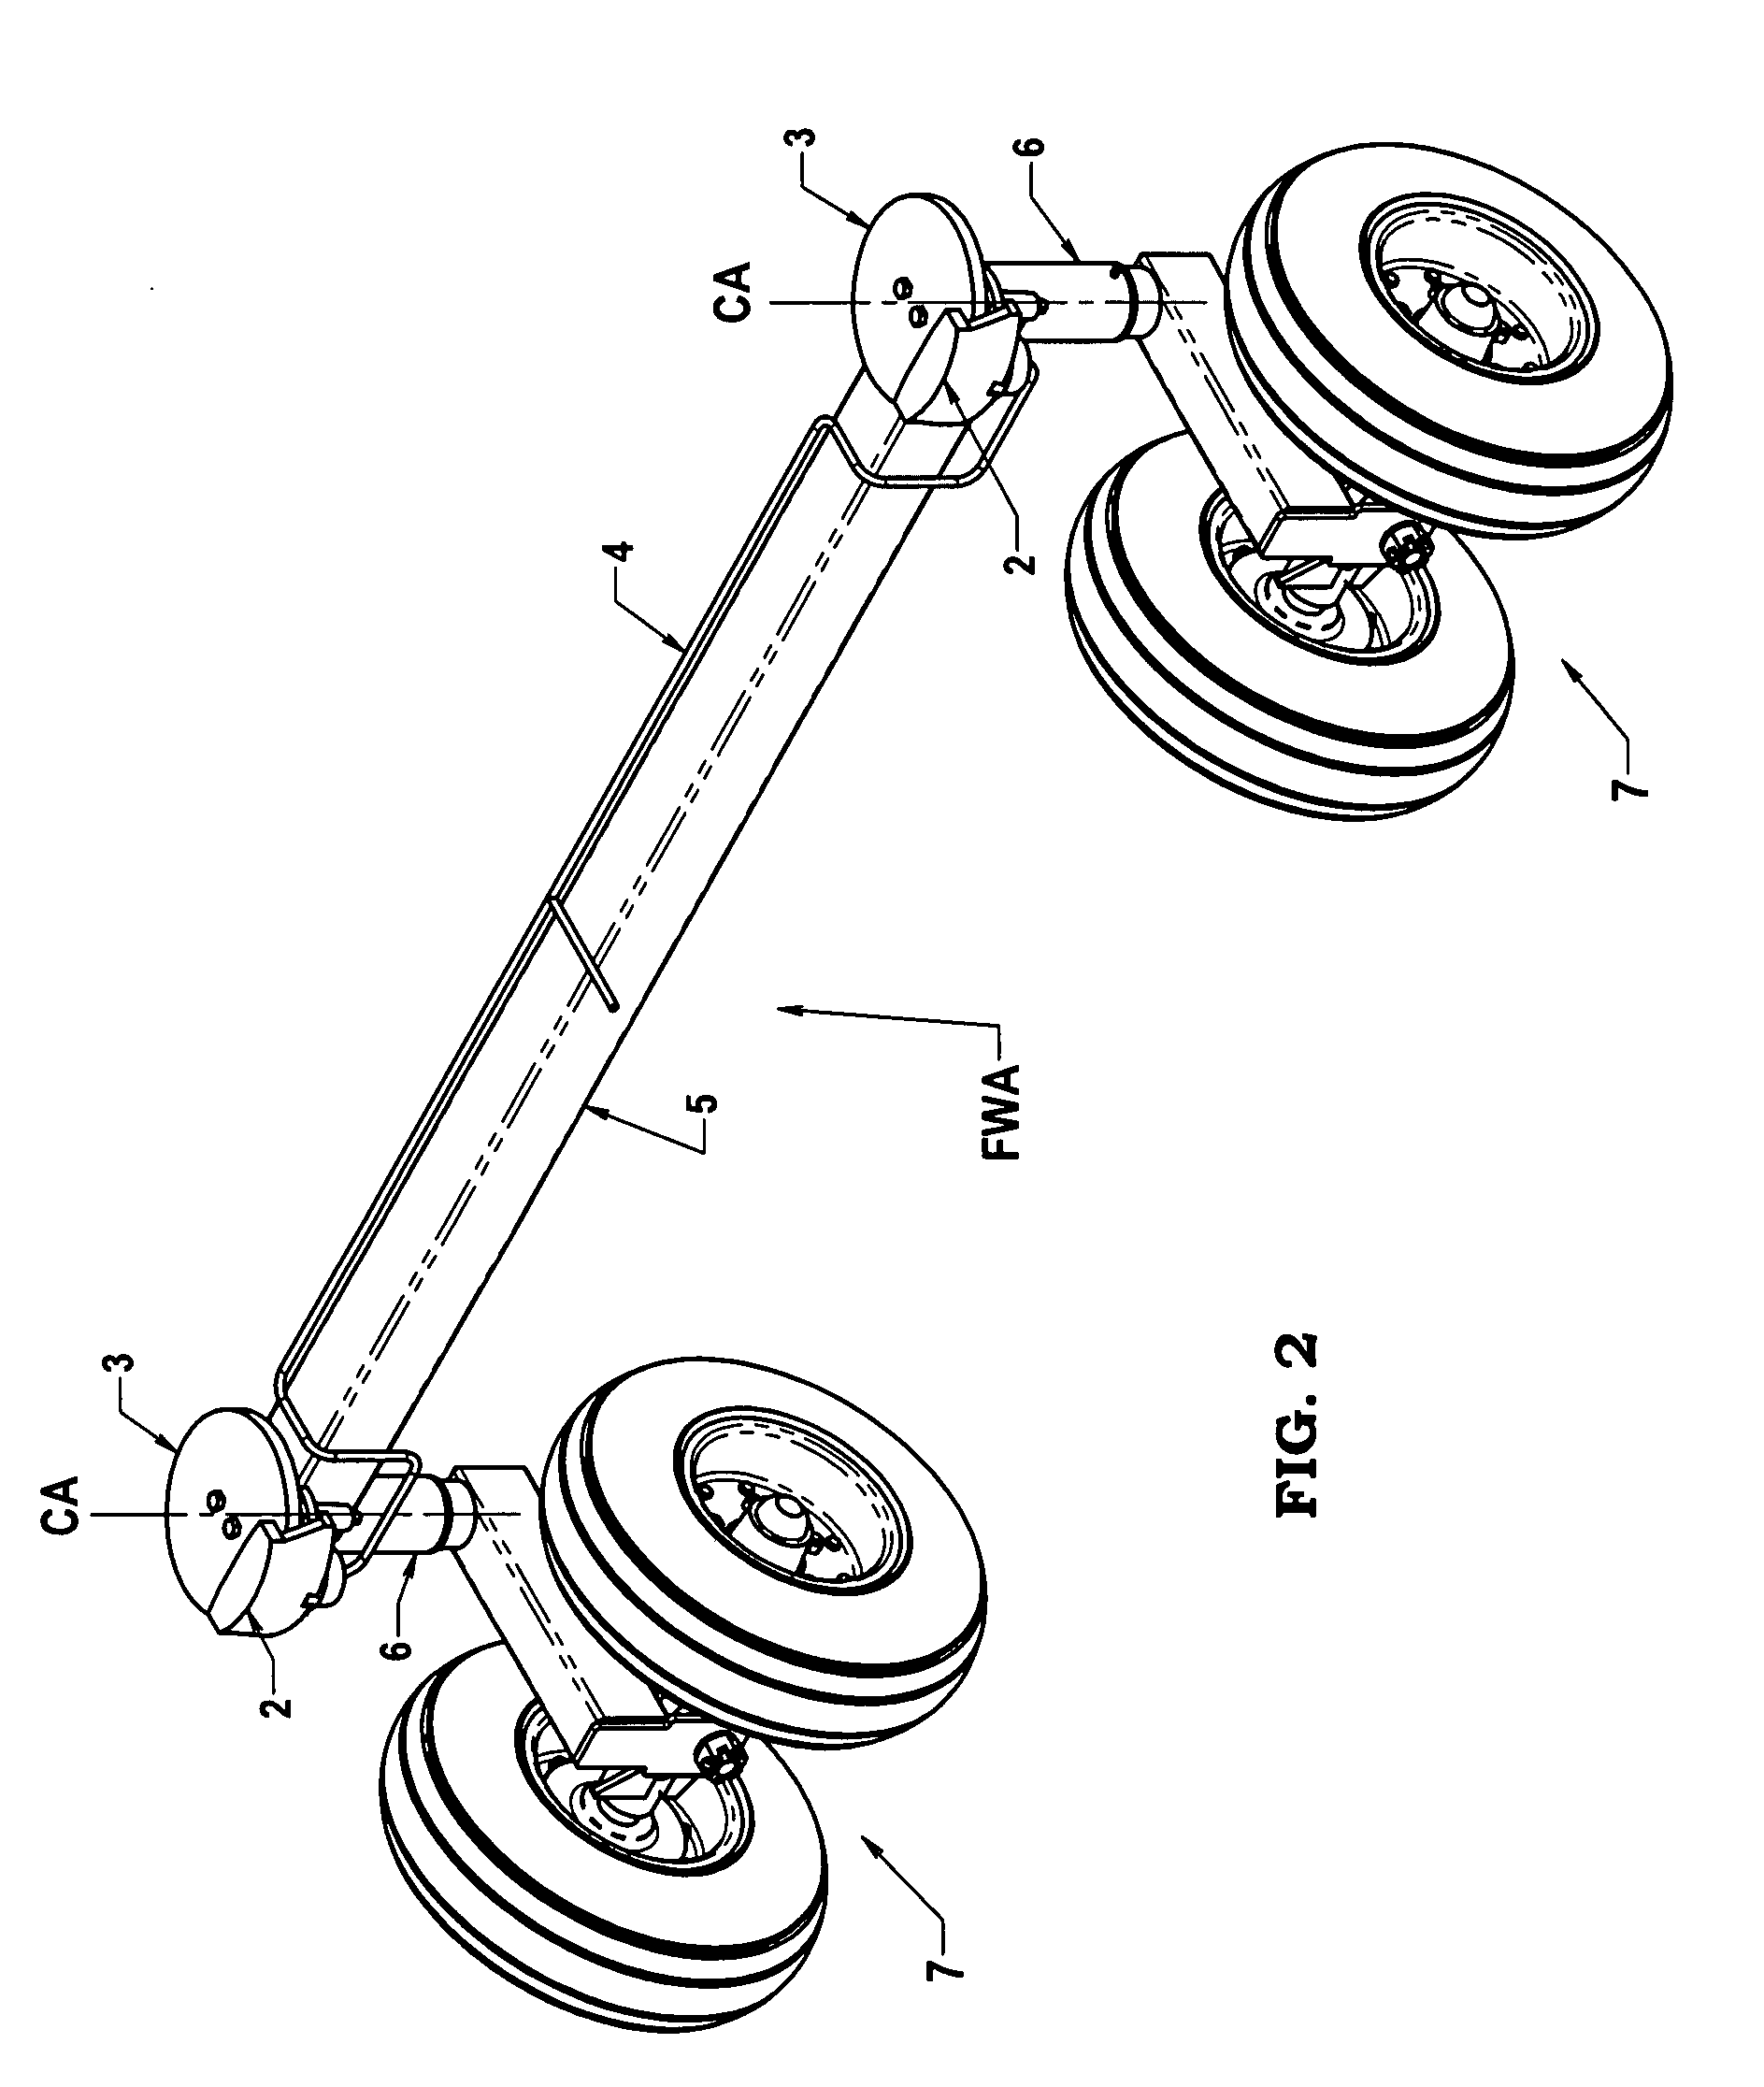 Brake Mechanism for a Caster Wheel on a Offset Rotary Mower